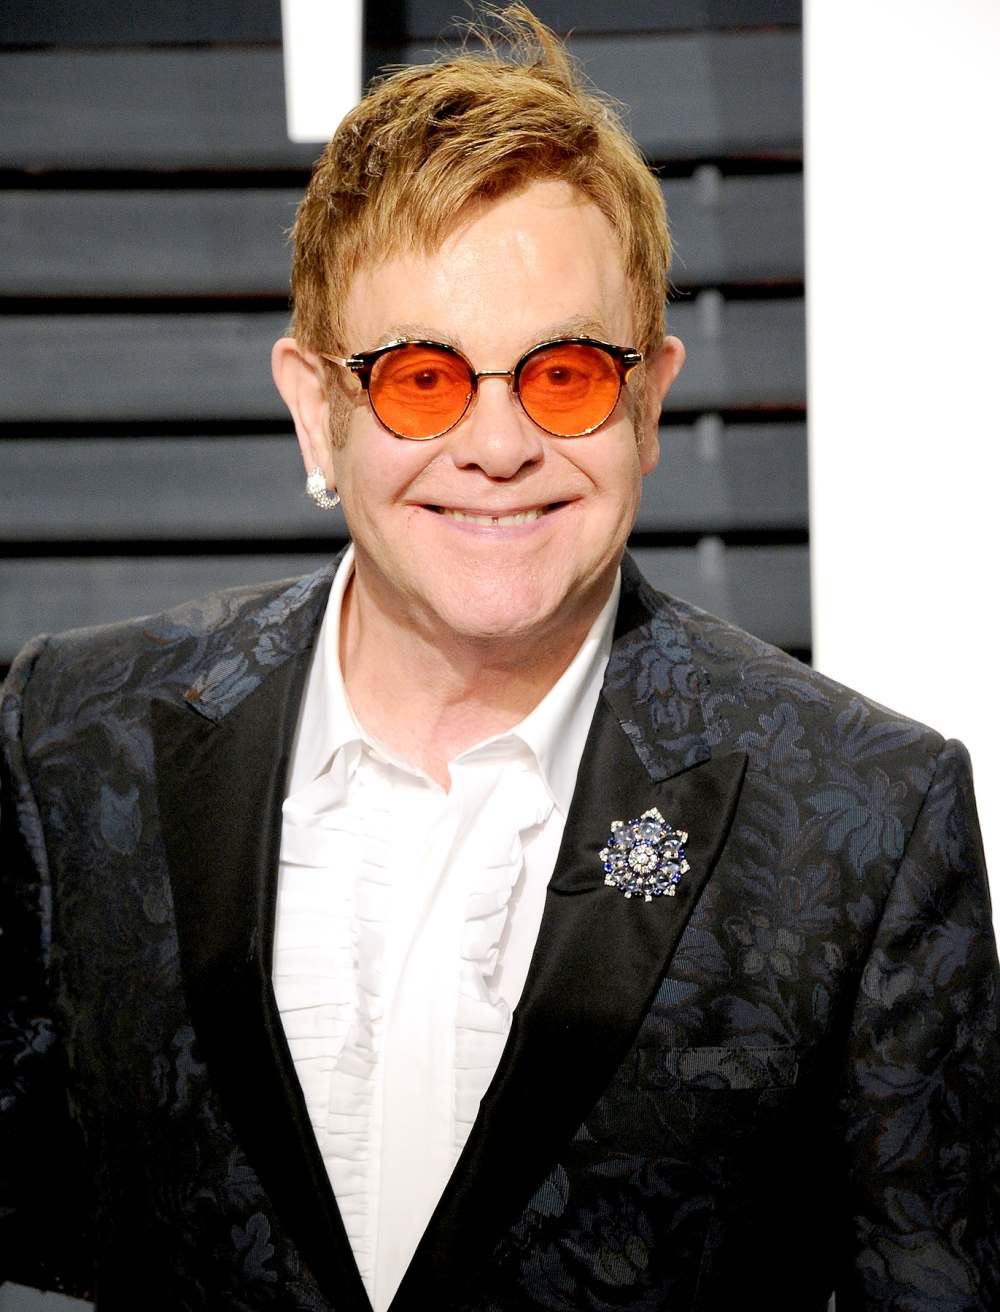 Elton John attends the 2017 Vanity Fair Oscar Party hosted by Graydon Carter at Wallis Annenberg Center for the Performing Arts on February 26, 2017 in Beverly Hills, California.